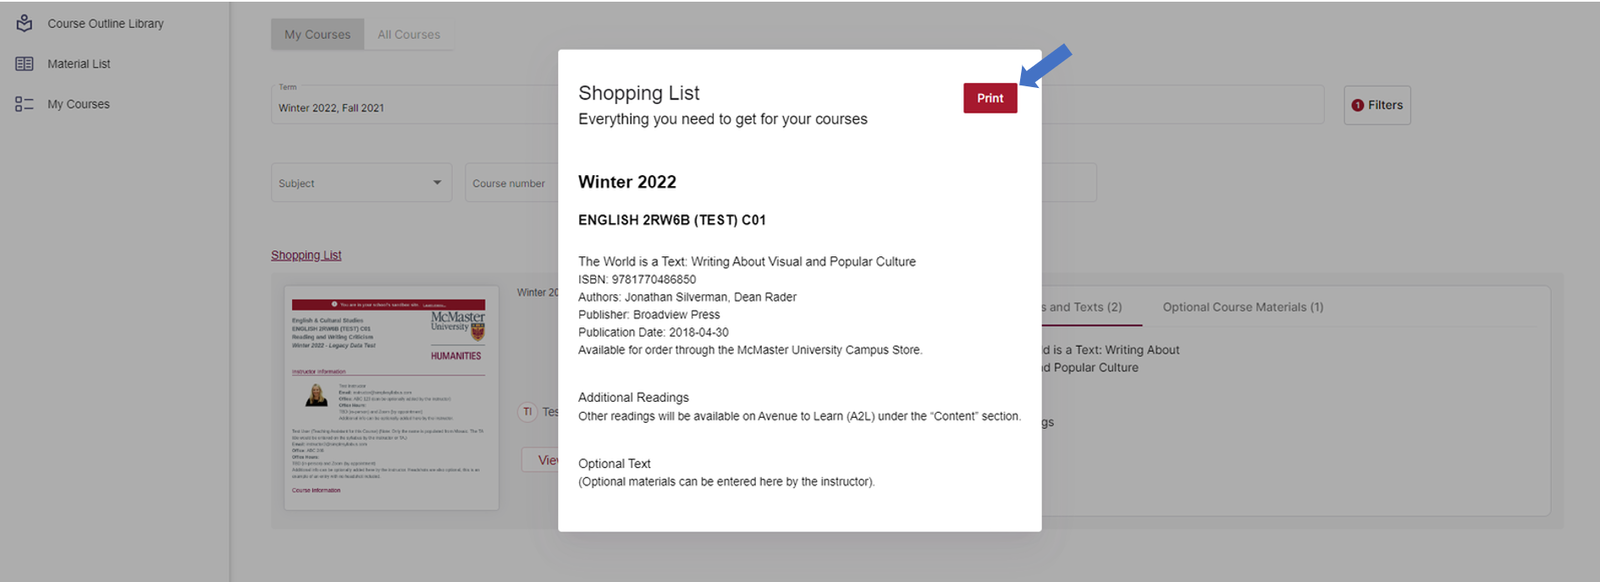 The pop-up showing the shopping list of all courses taken in a semester. In this picture, Winter 2022 is chosen, and the shopping list for English 2RW6B is shown